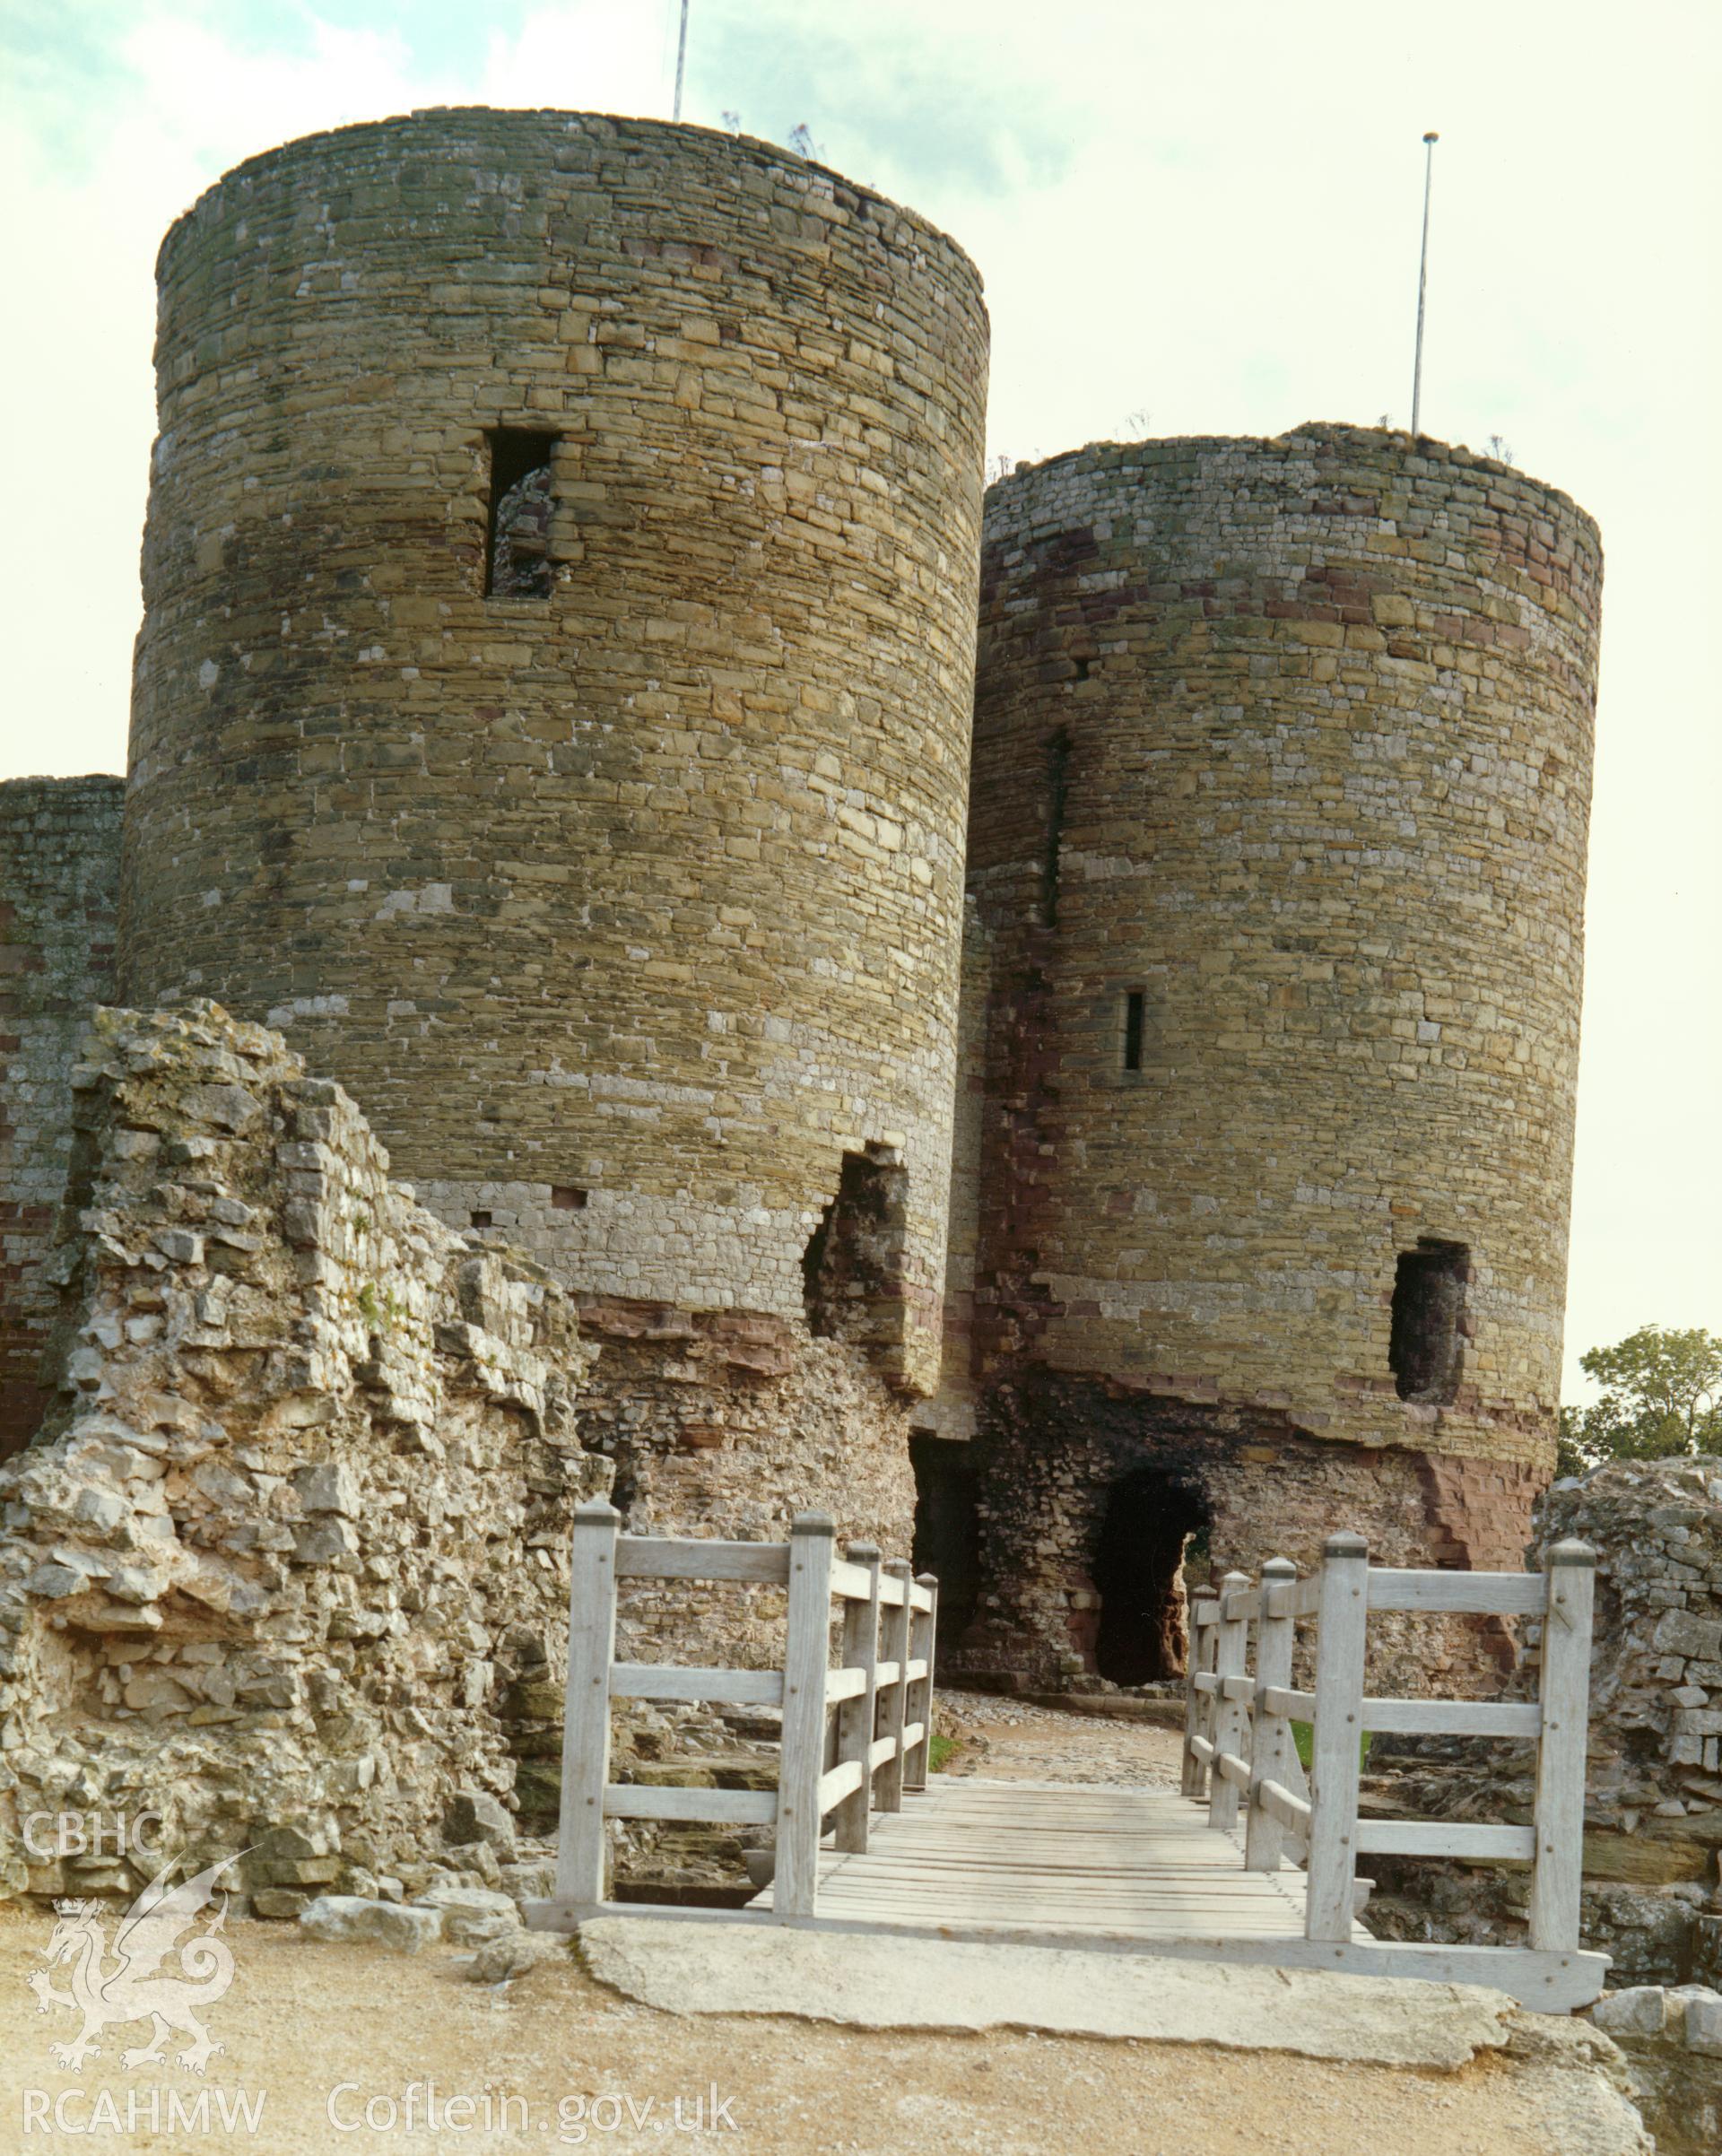 1 colour print showing view of Rhuddlan castle, collated by the former Central Office of Information.